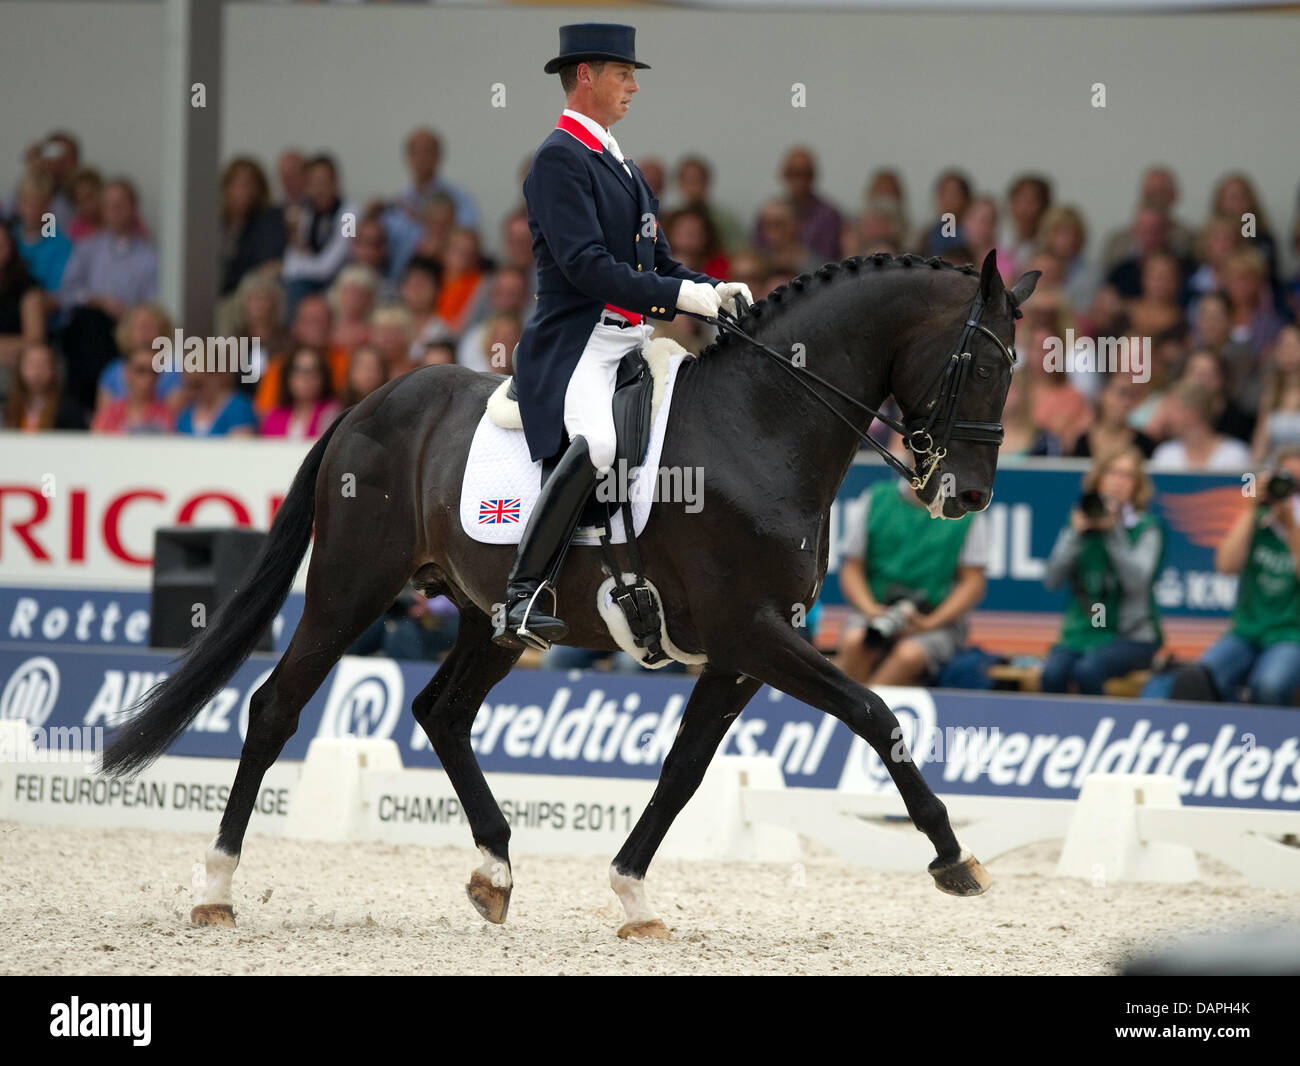 Britain's Carl Hester in action on his horse Uthopia during the Grand Prix Special at the European Dressage Championship in Rotterdam, Netherlands, 20 August 2011. Cornelissen took first place. Hester took second place. Photo: Uwe Anspach Stock Photo